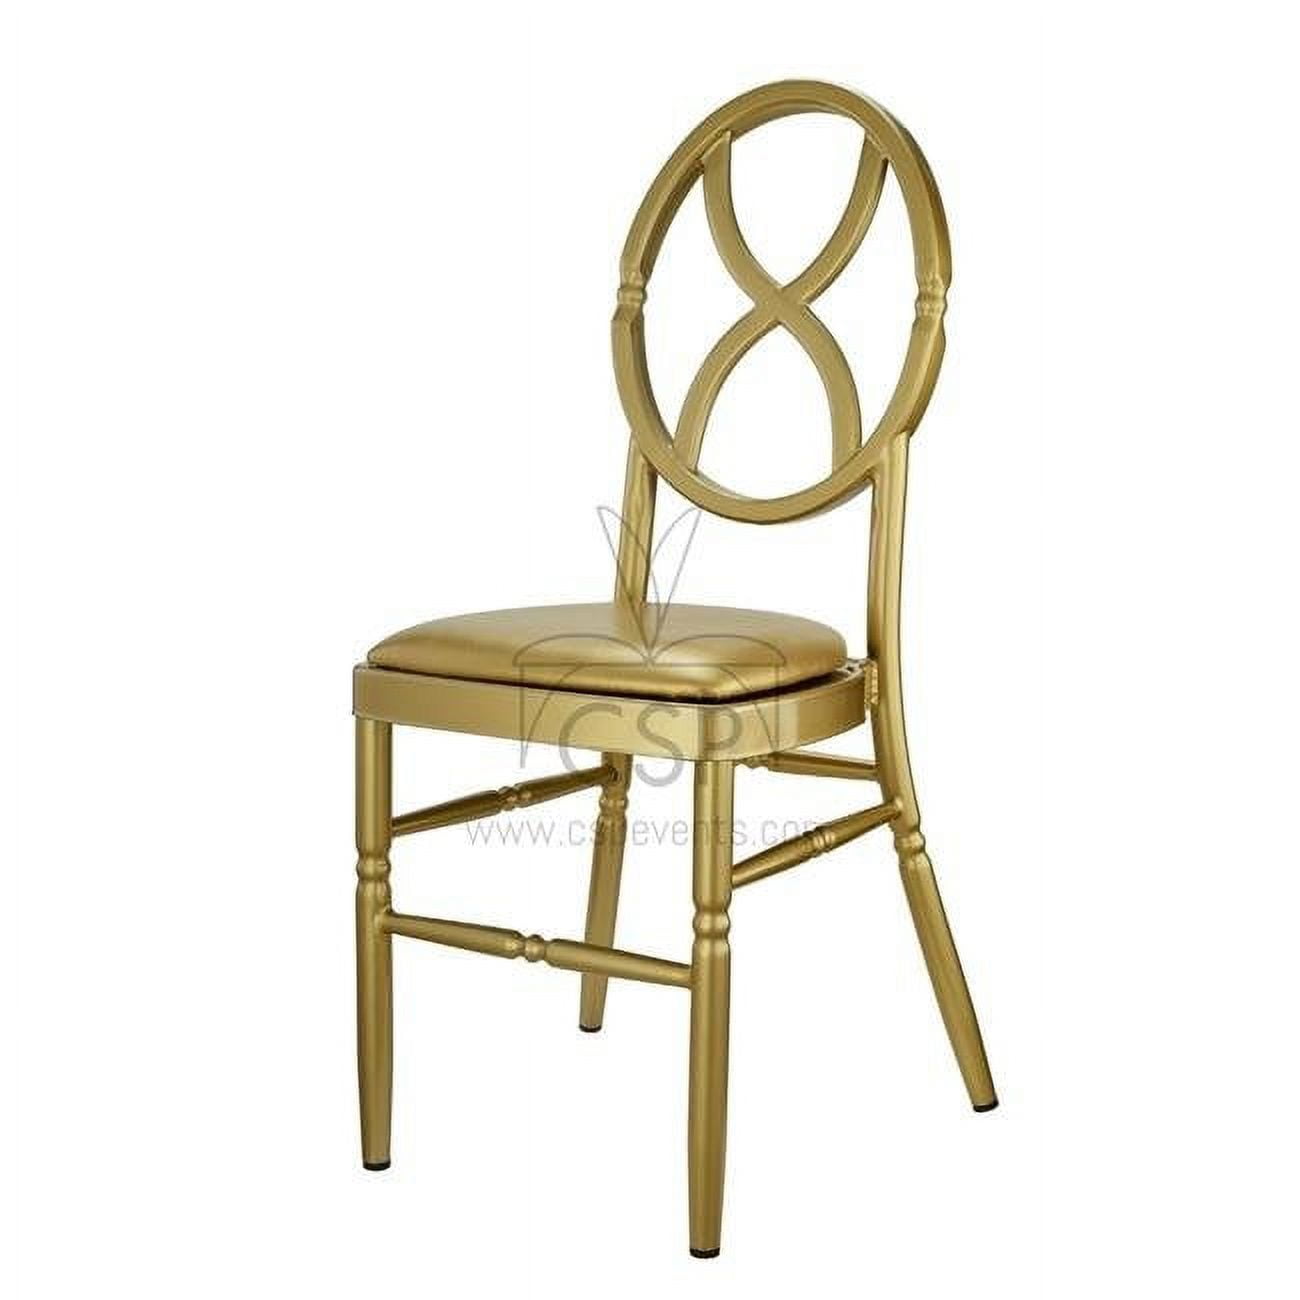 W-412-vr-sandglass-gl Veronique Series Stackable Sand Glass Wood Dining Chair - Gold - 39 In.